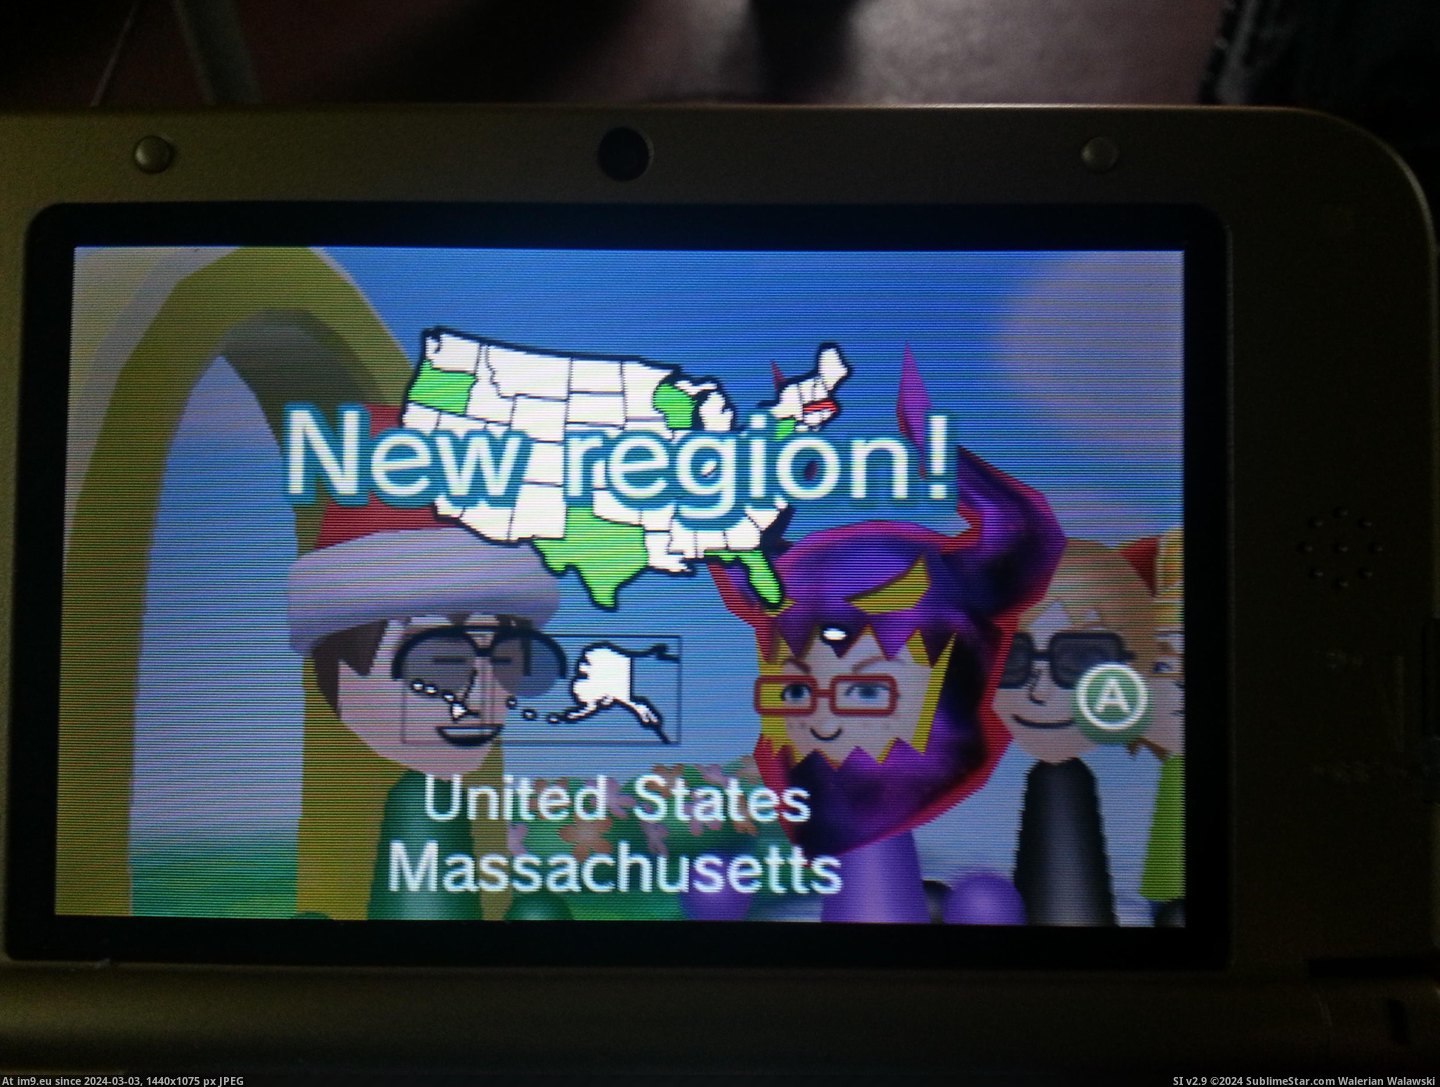 #Gaming #World #Carry #Spotpass #Disney #3ds [Gaming] This is what happens when you carry around your 3DS and spotpass in Disney World 14 Pic. (Изображение из альбом My r/GAMING favs))